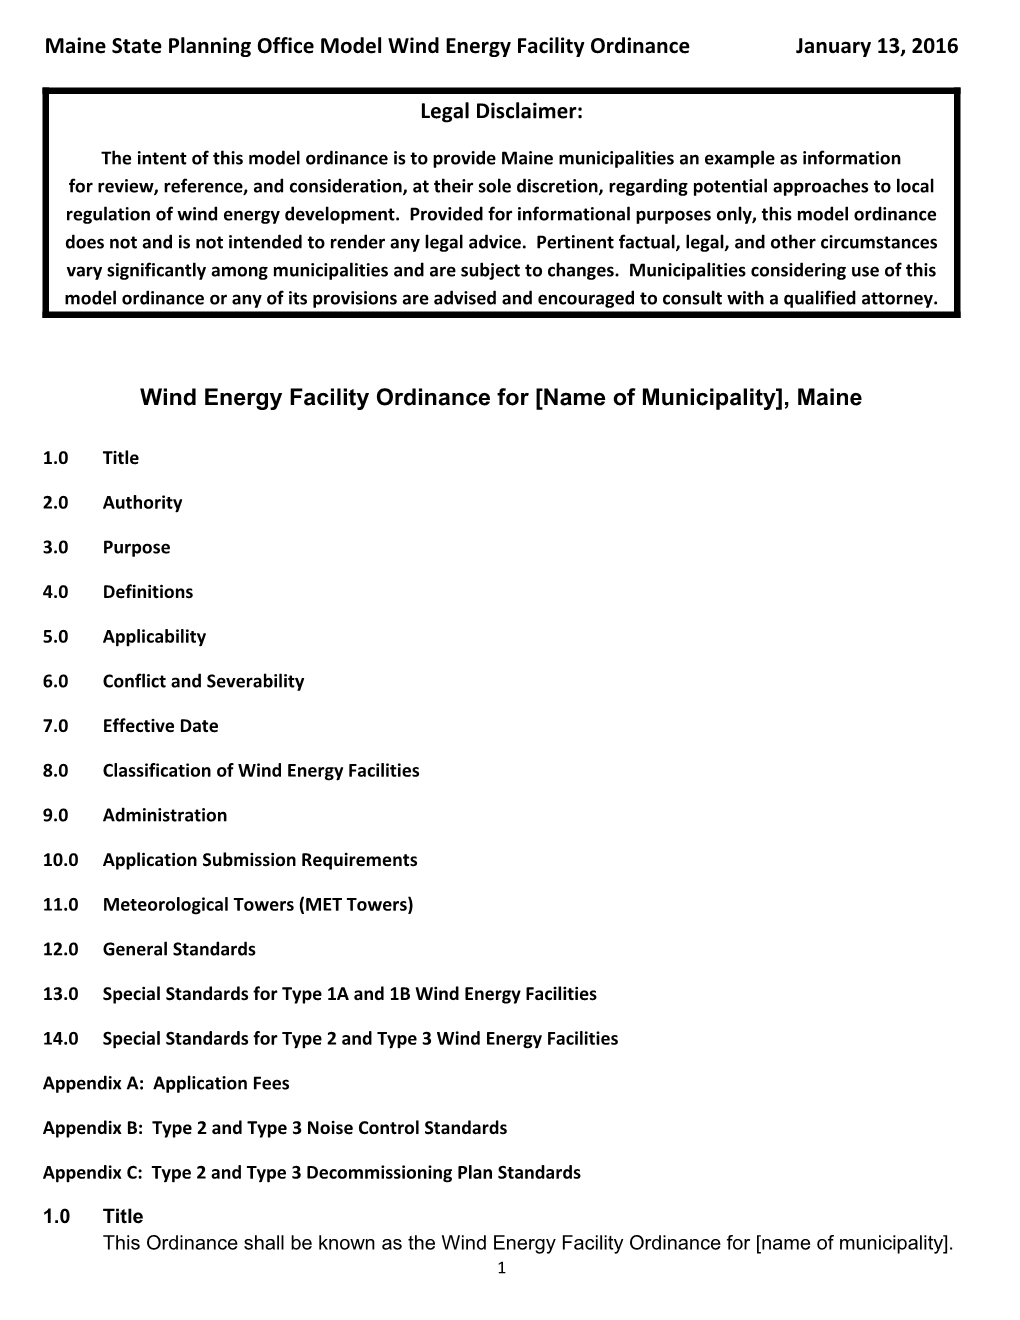 Maine State Planning Office Model Wind Energy Facility Ordinance January 13, 2016